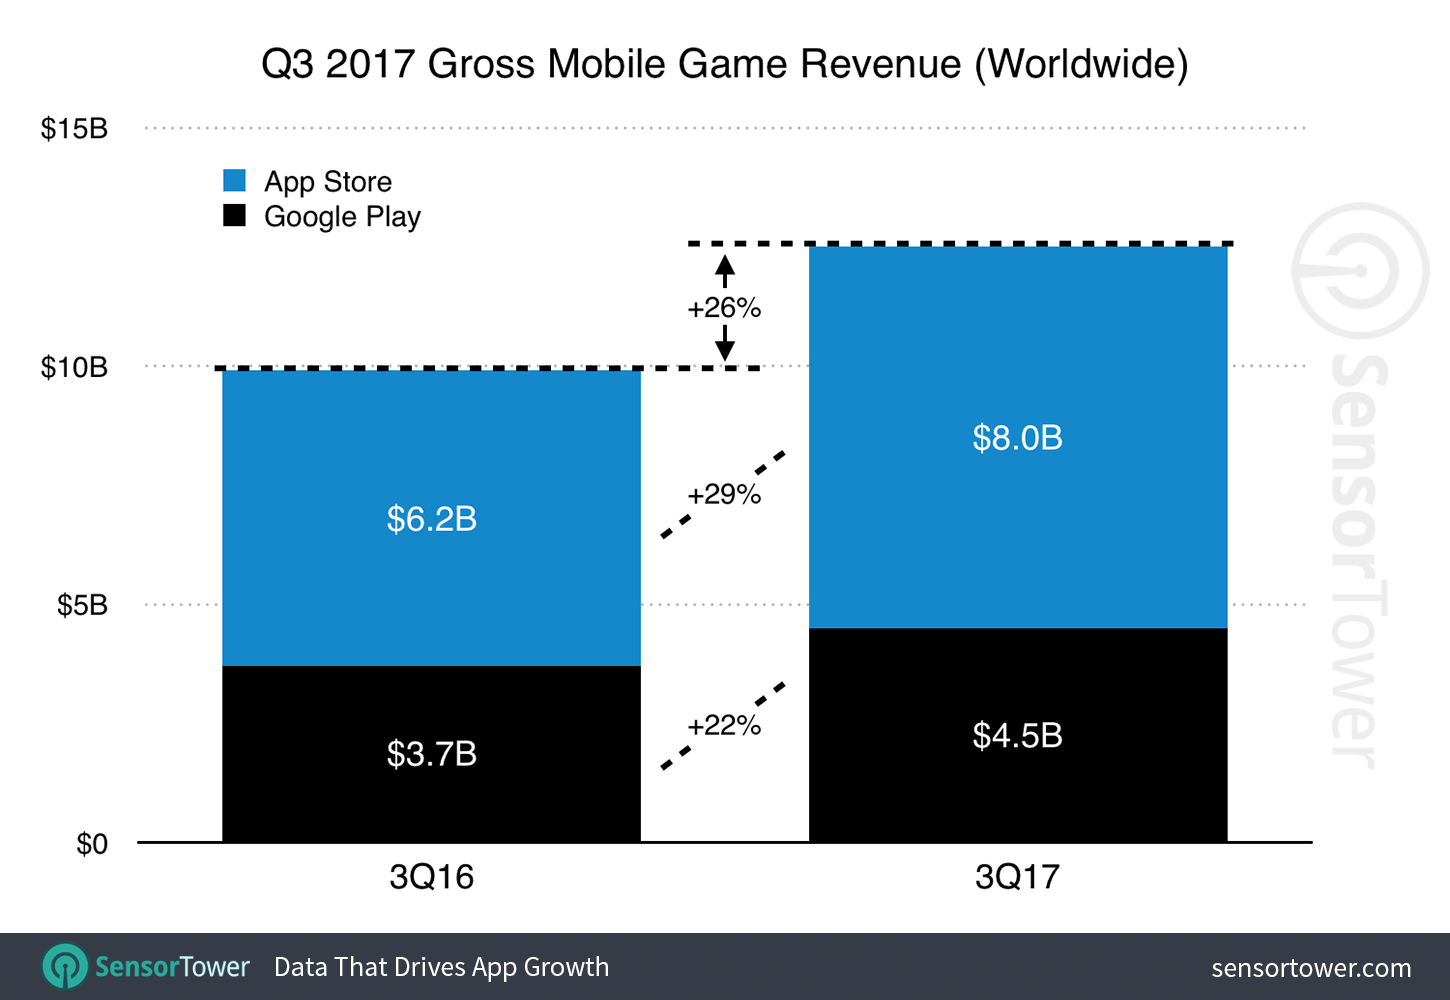 Q3 2017 Games Category Worldwide Revenue Growth